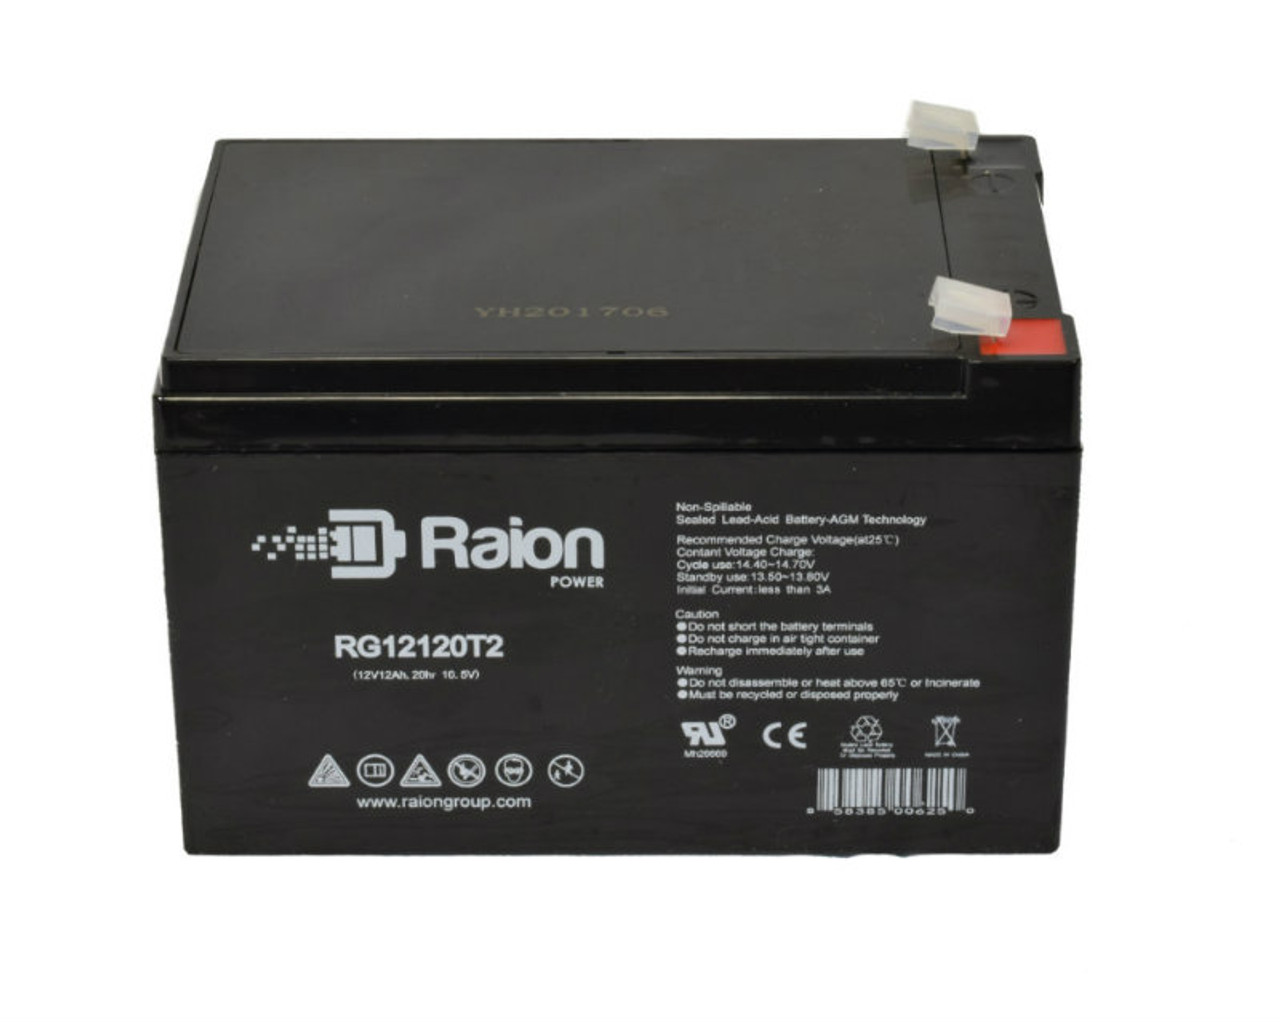 Raion Power RG12120T2 SLA Battery for Invacare 220 Scooter